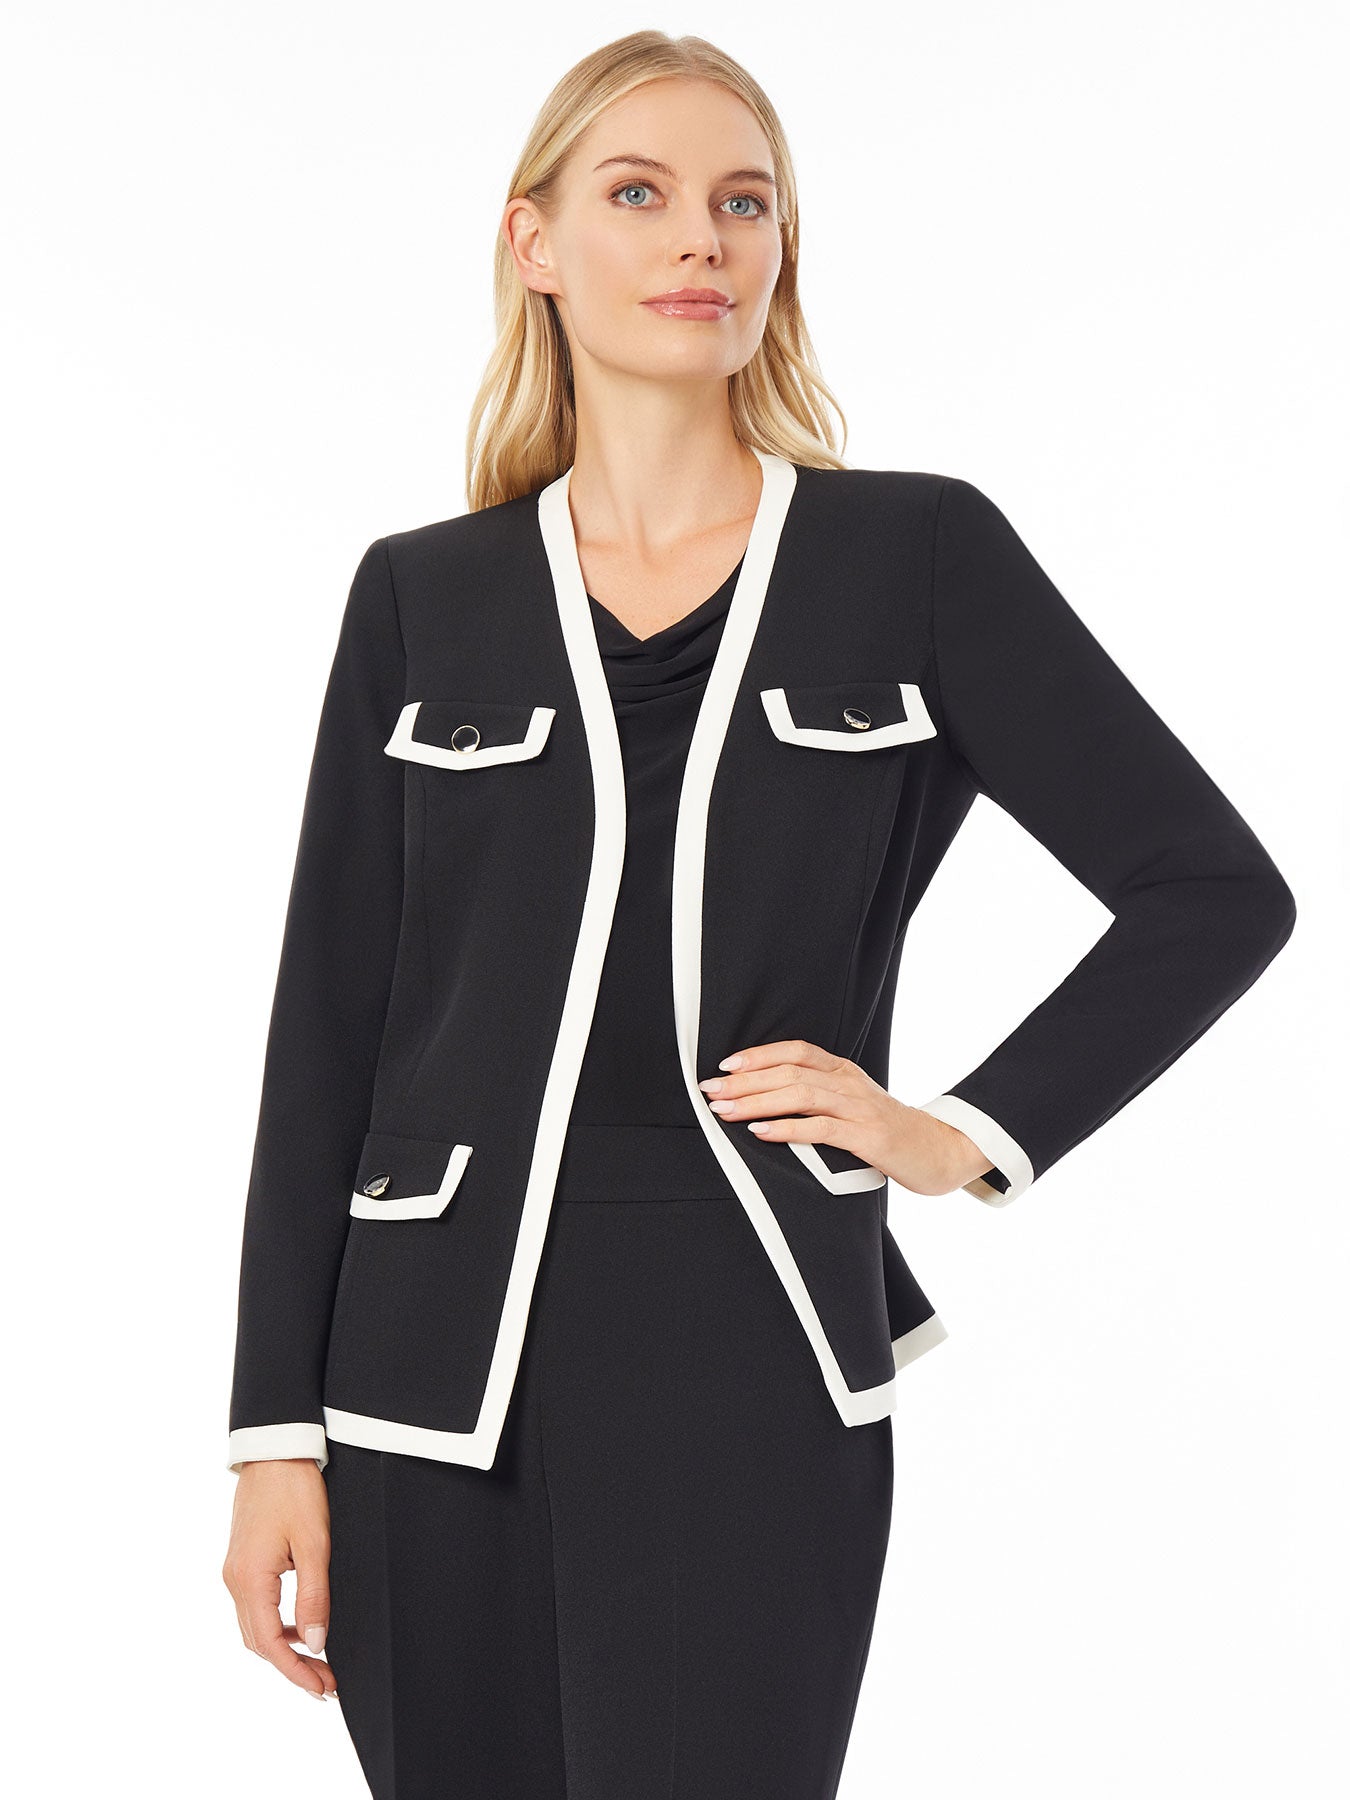 Women's Sale Clothing - Business Casual Clothes for Women